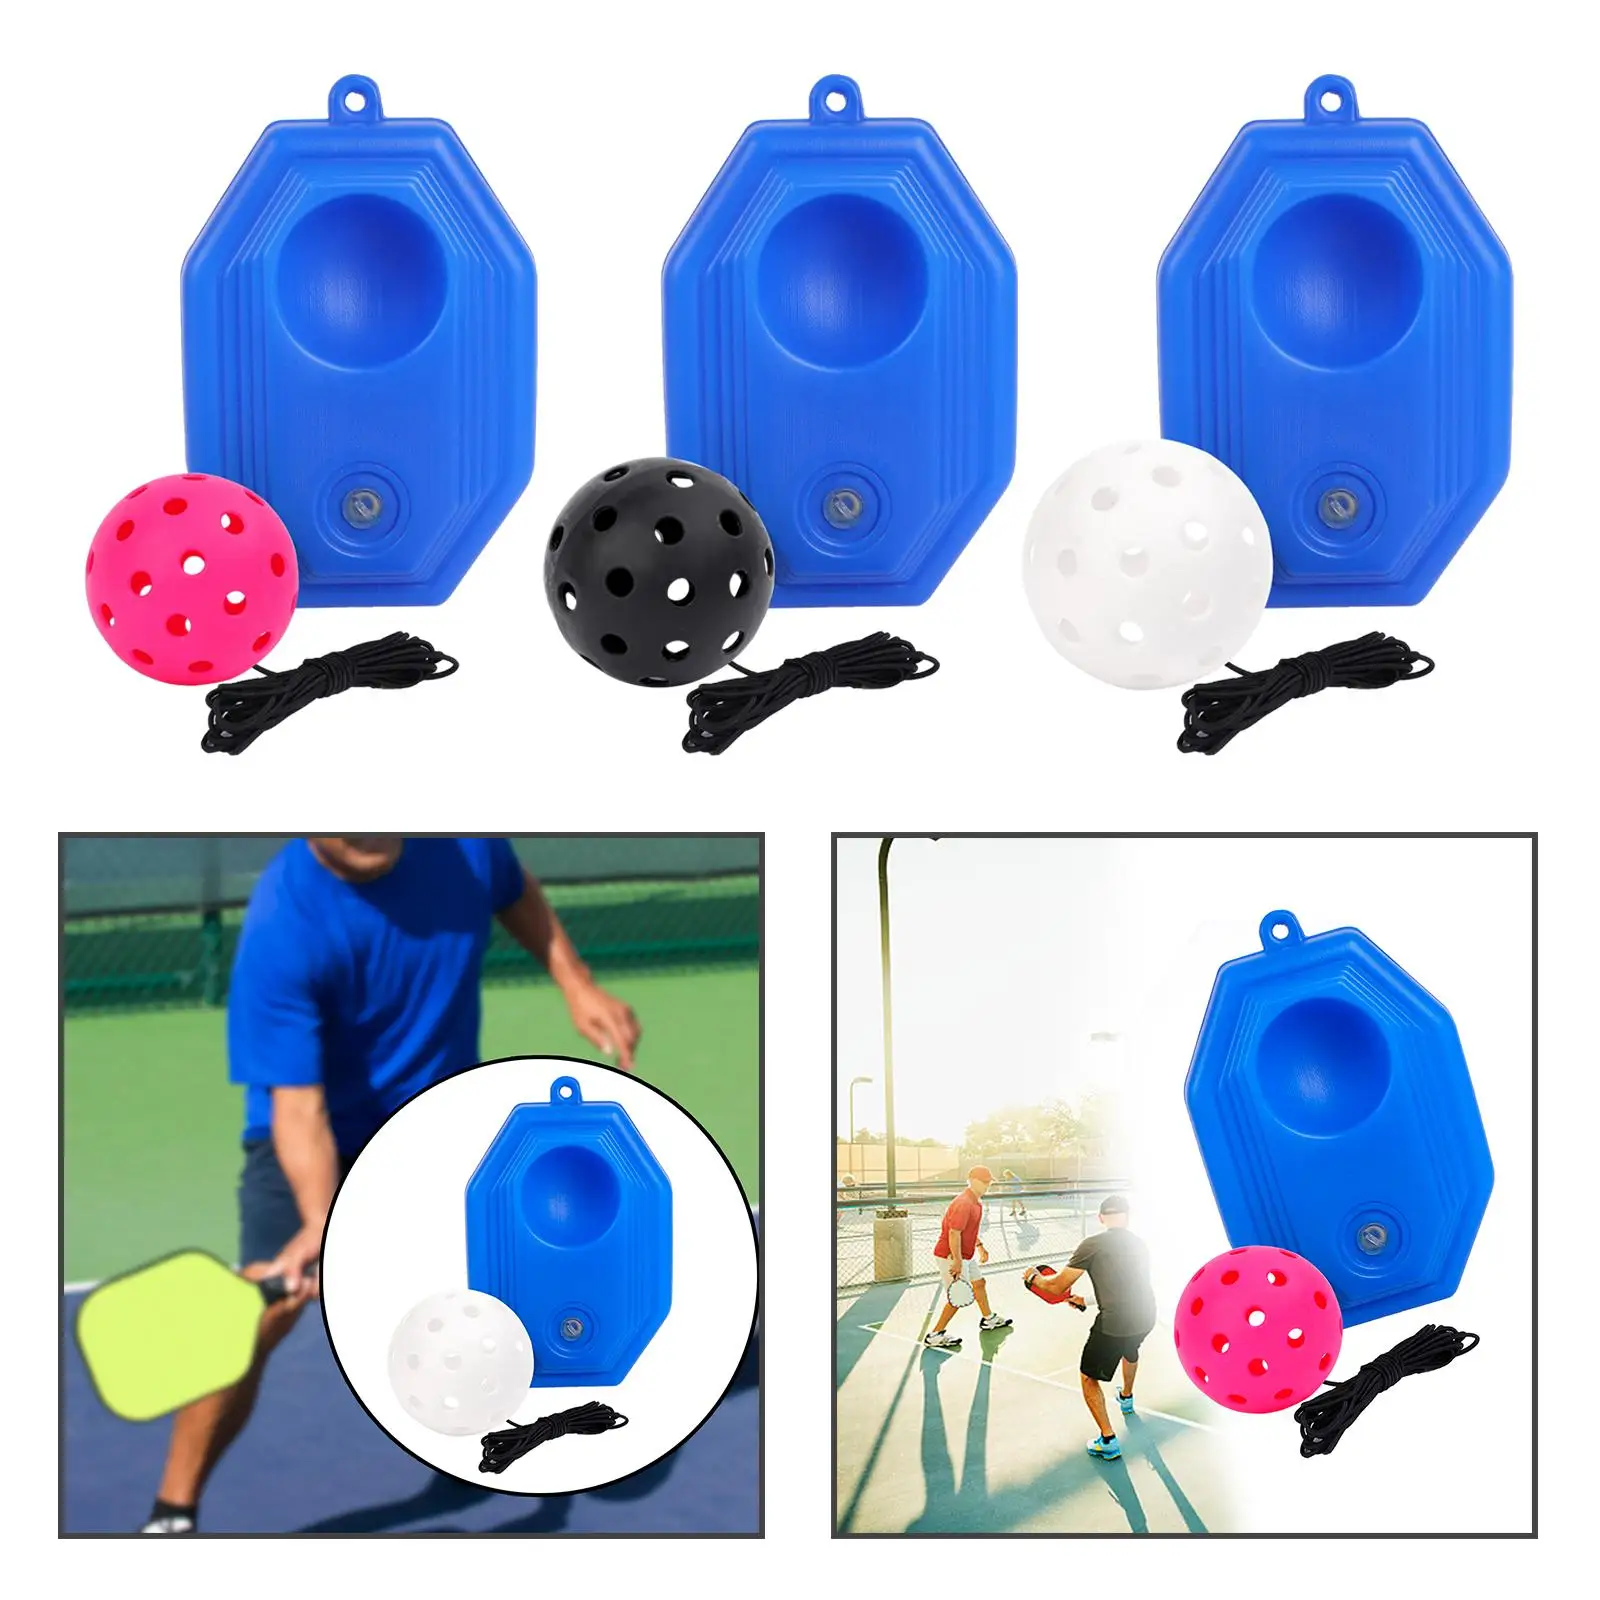 Pickleball Trainer Pickleball Training Base Portable Pickleball Solo Trainer Pickleball Training Aid for Practice Kids Adults